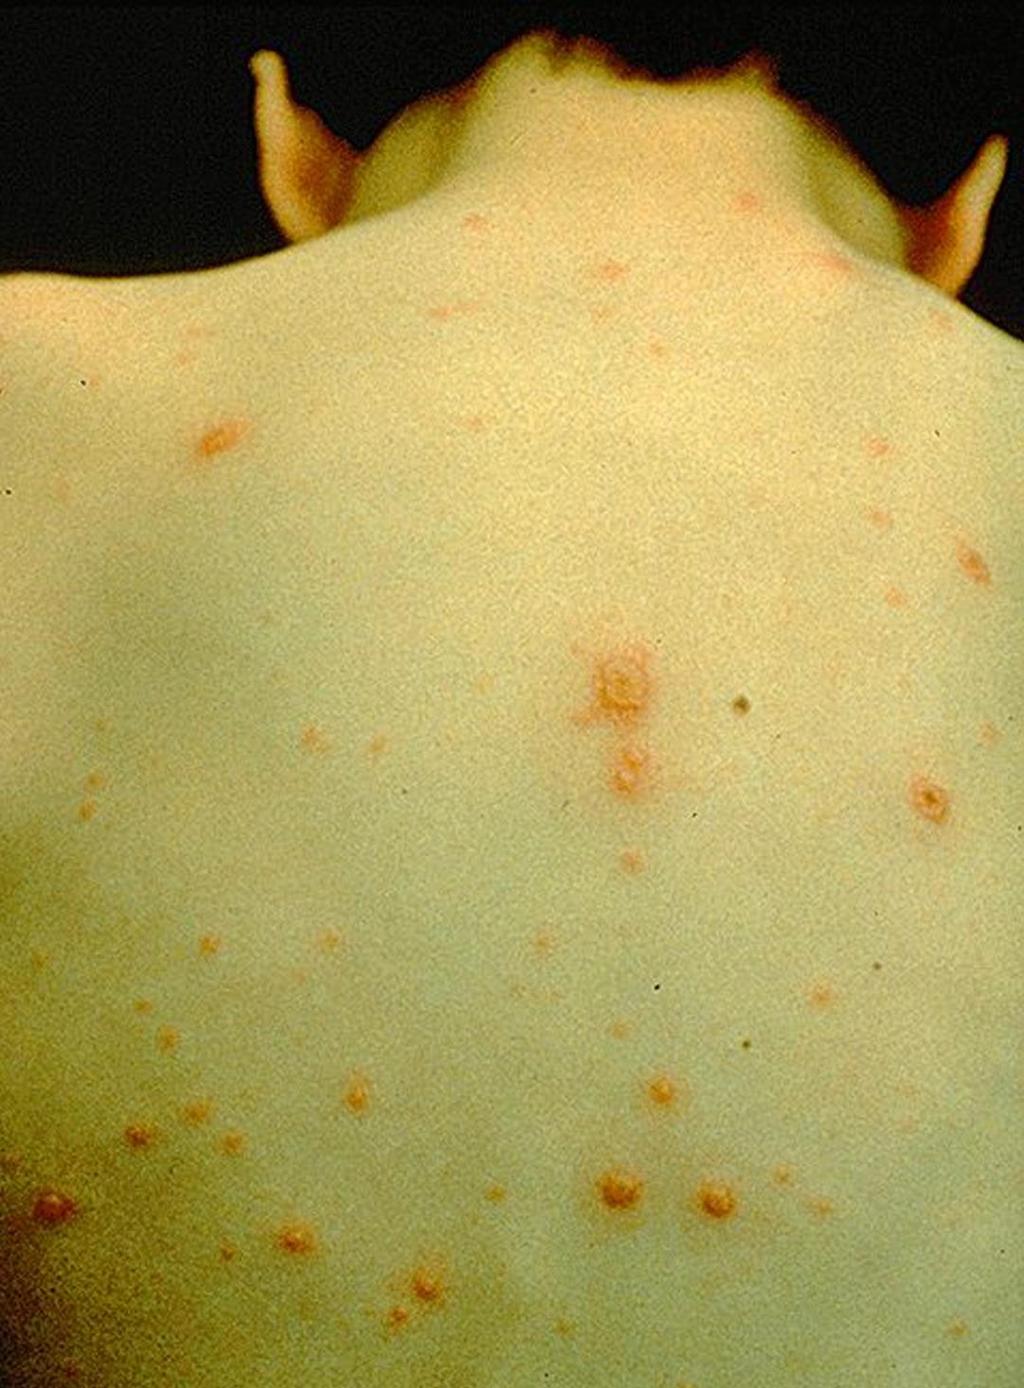 Varicella (Chickenpox) Virus Skin rash of blister-like lesions Bacterial infections